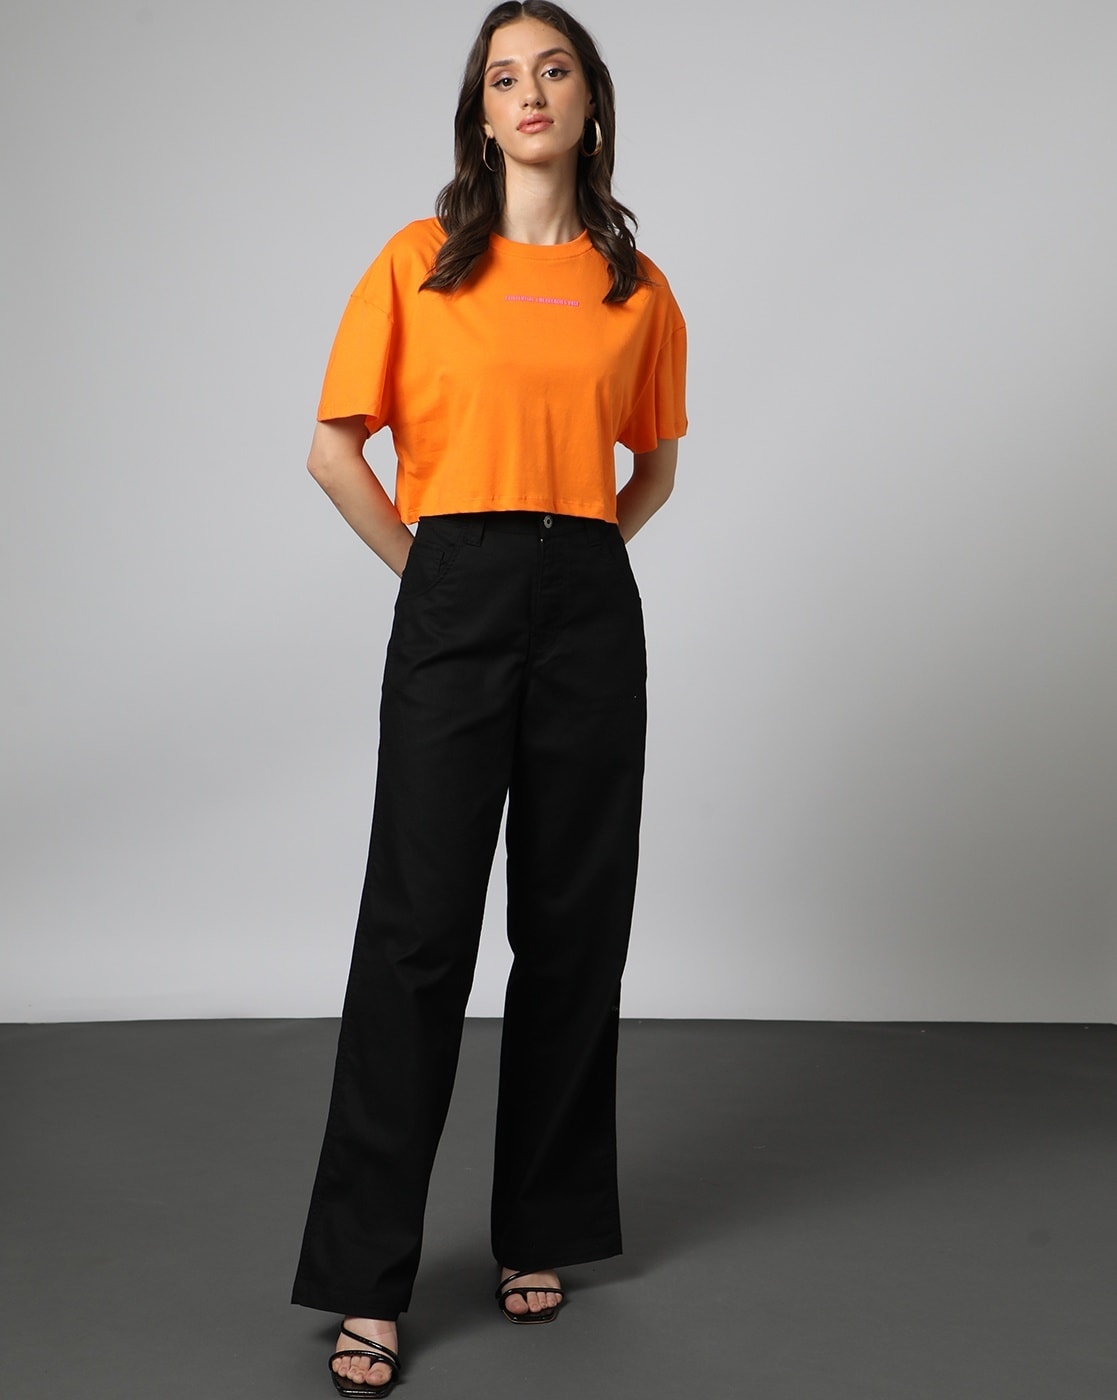 Buy Orange Tshirts for Women by Outryt Online